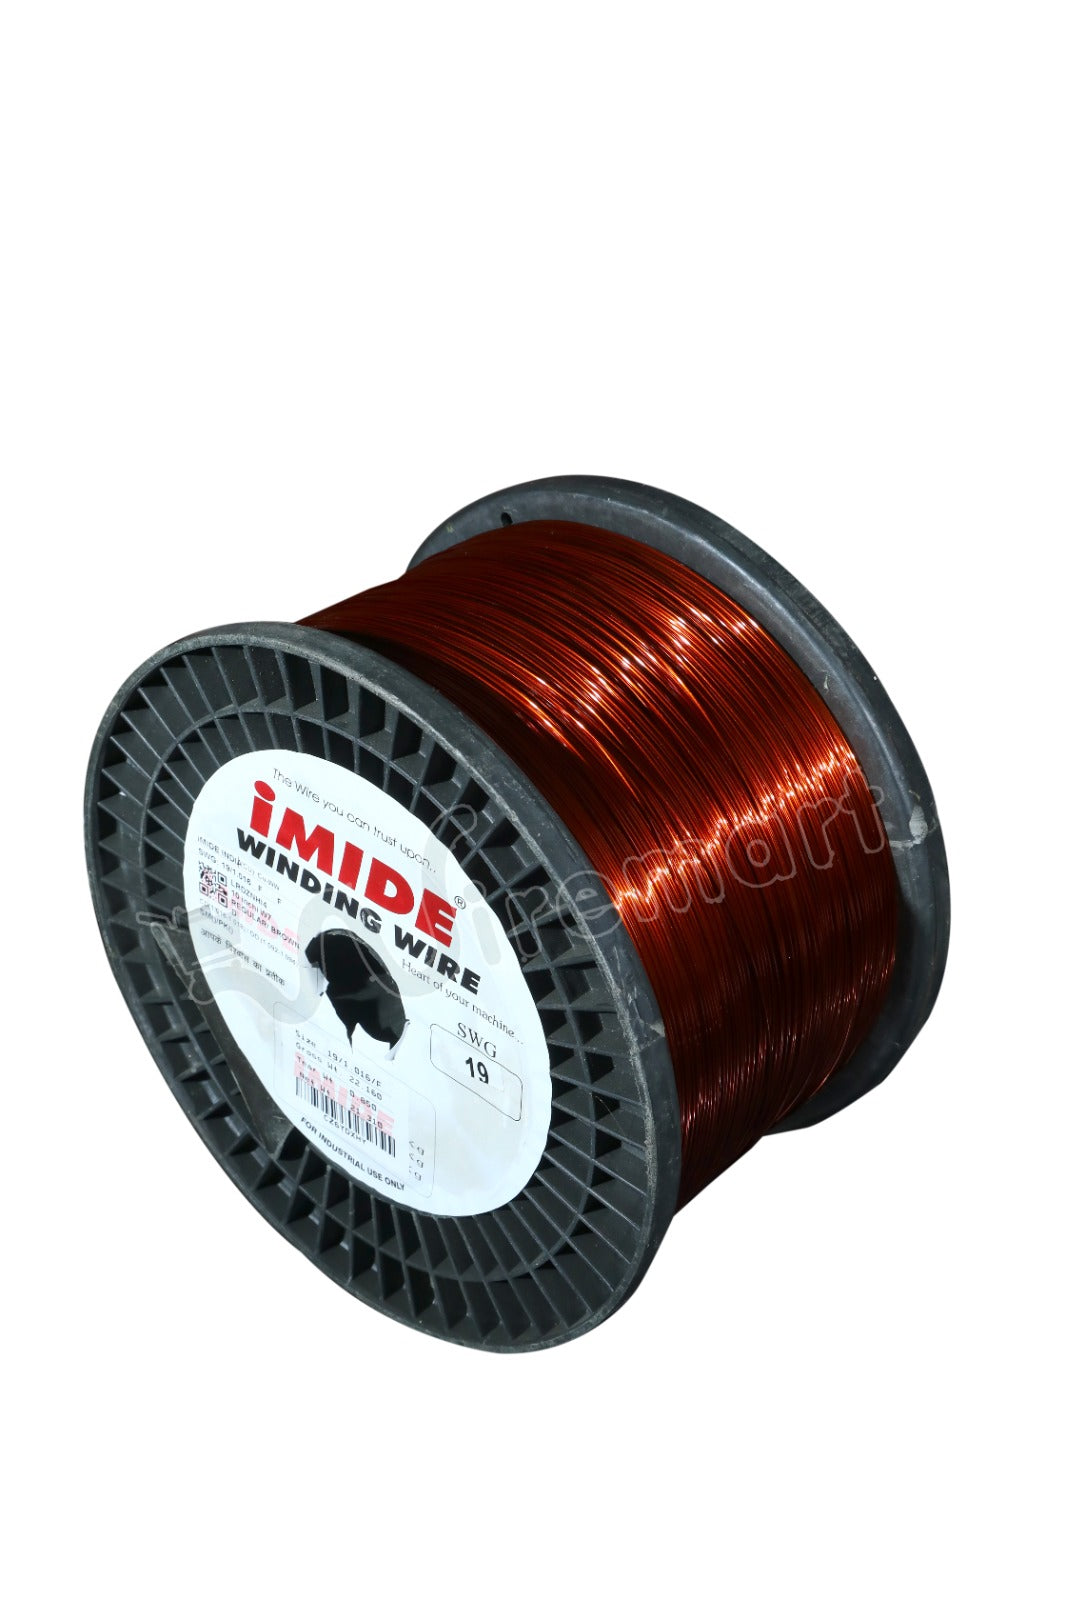 IMIDE Super Enamelled Copper Winding Wire